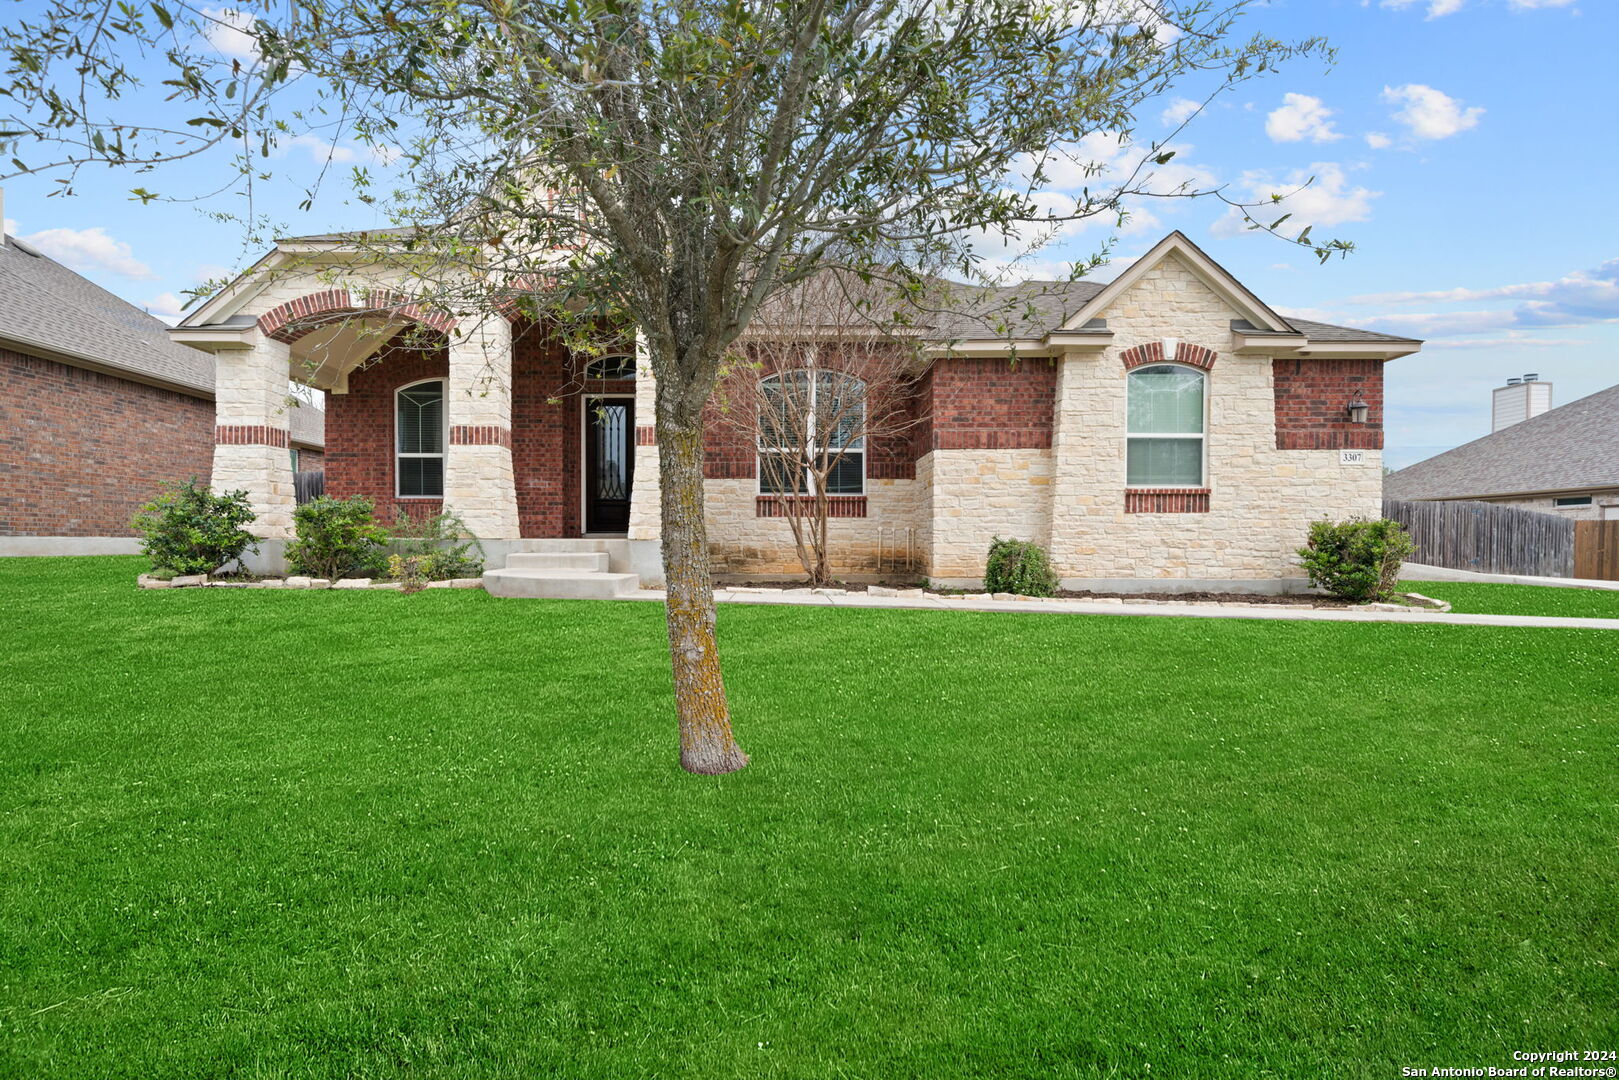 Photo of 3307 Ashleys Wy in Marion, TX